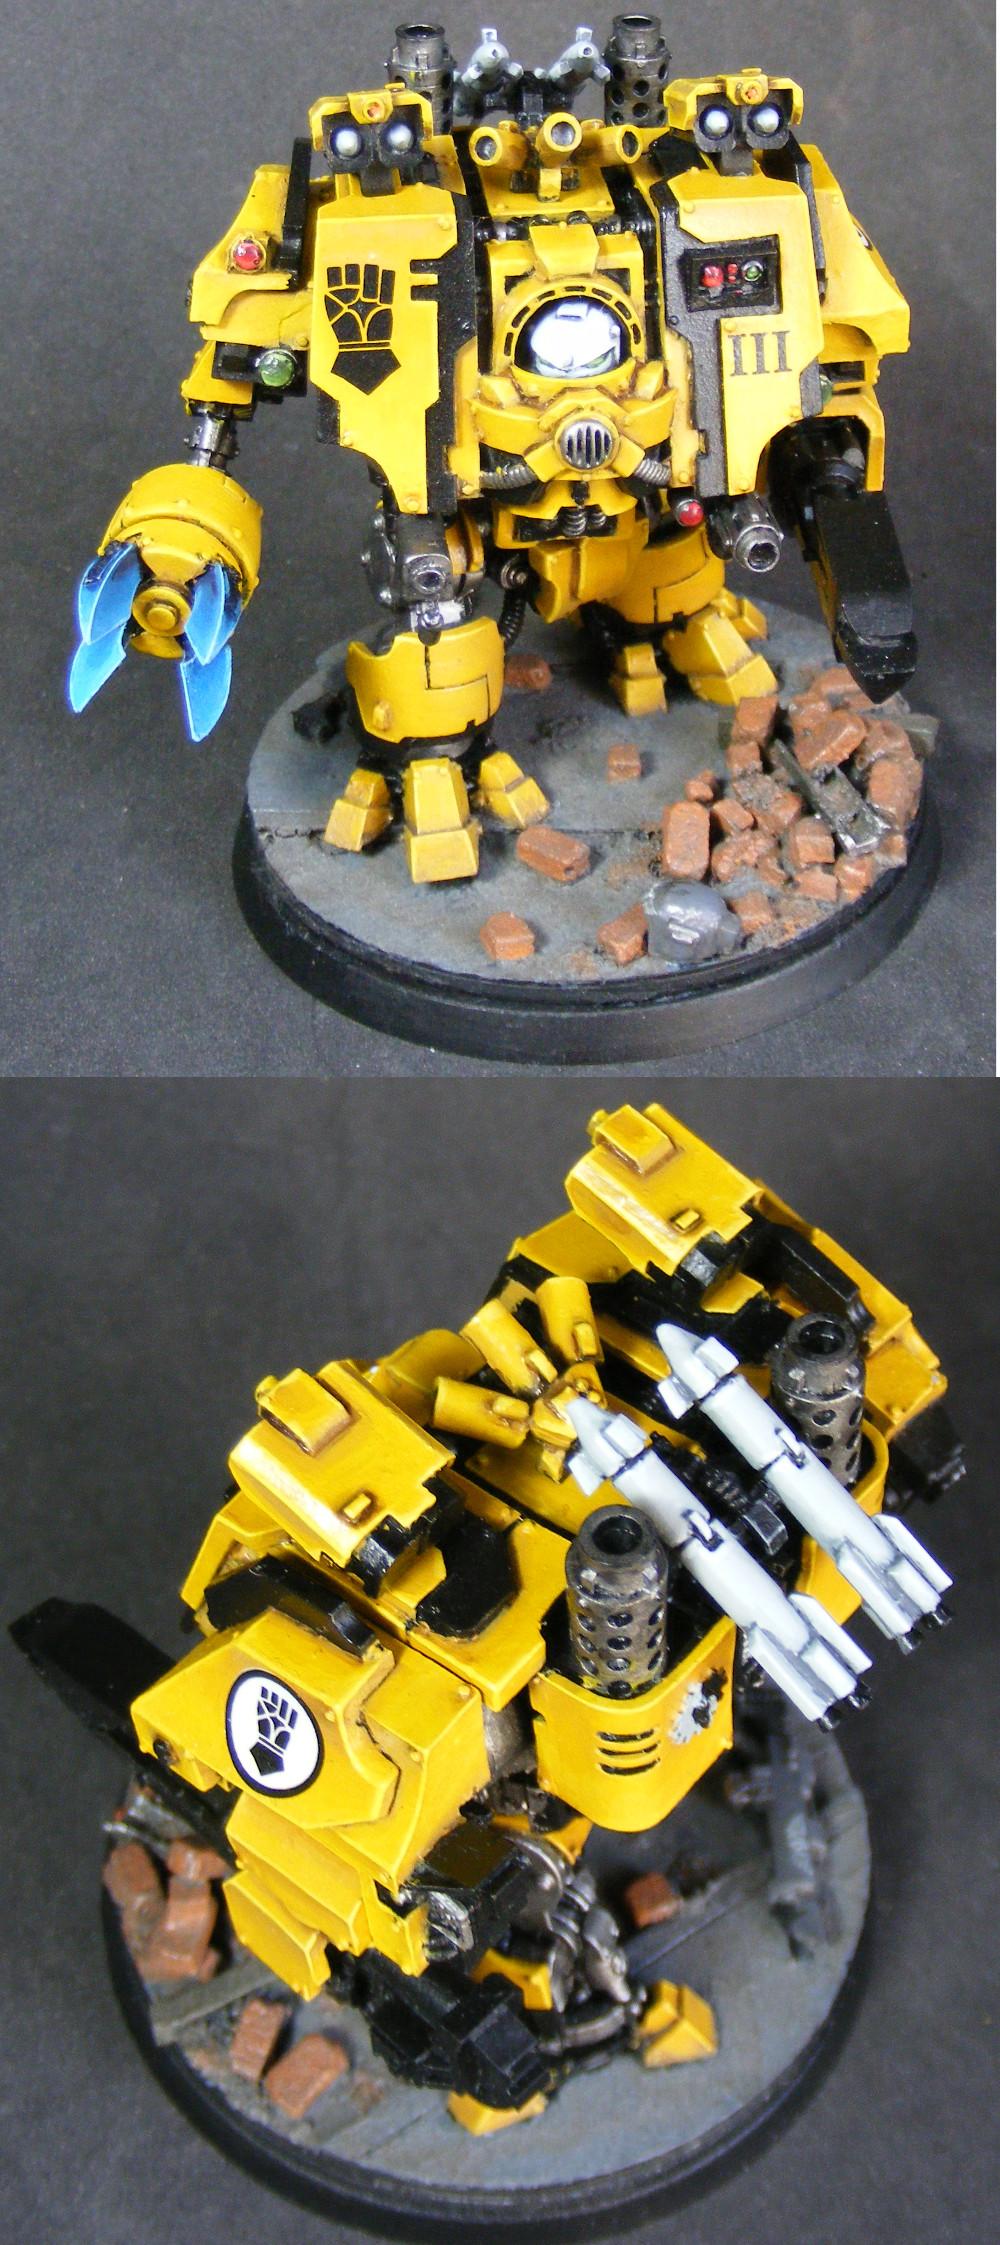 Dreadnought, Forge World, Imperial Fists, Ironclad, Space Marines